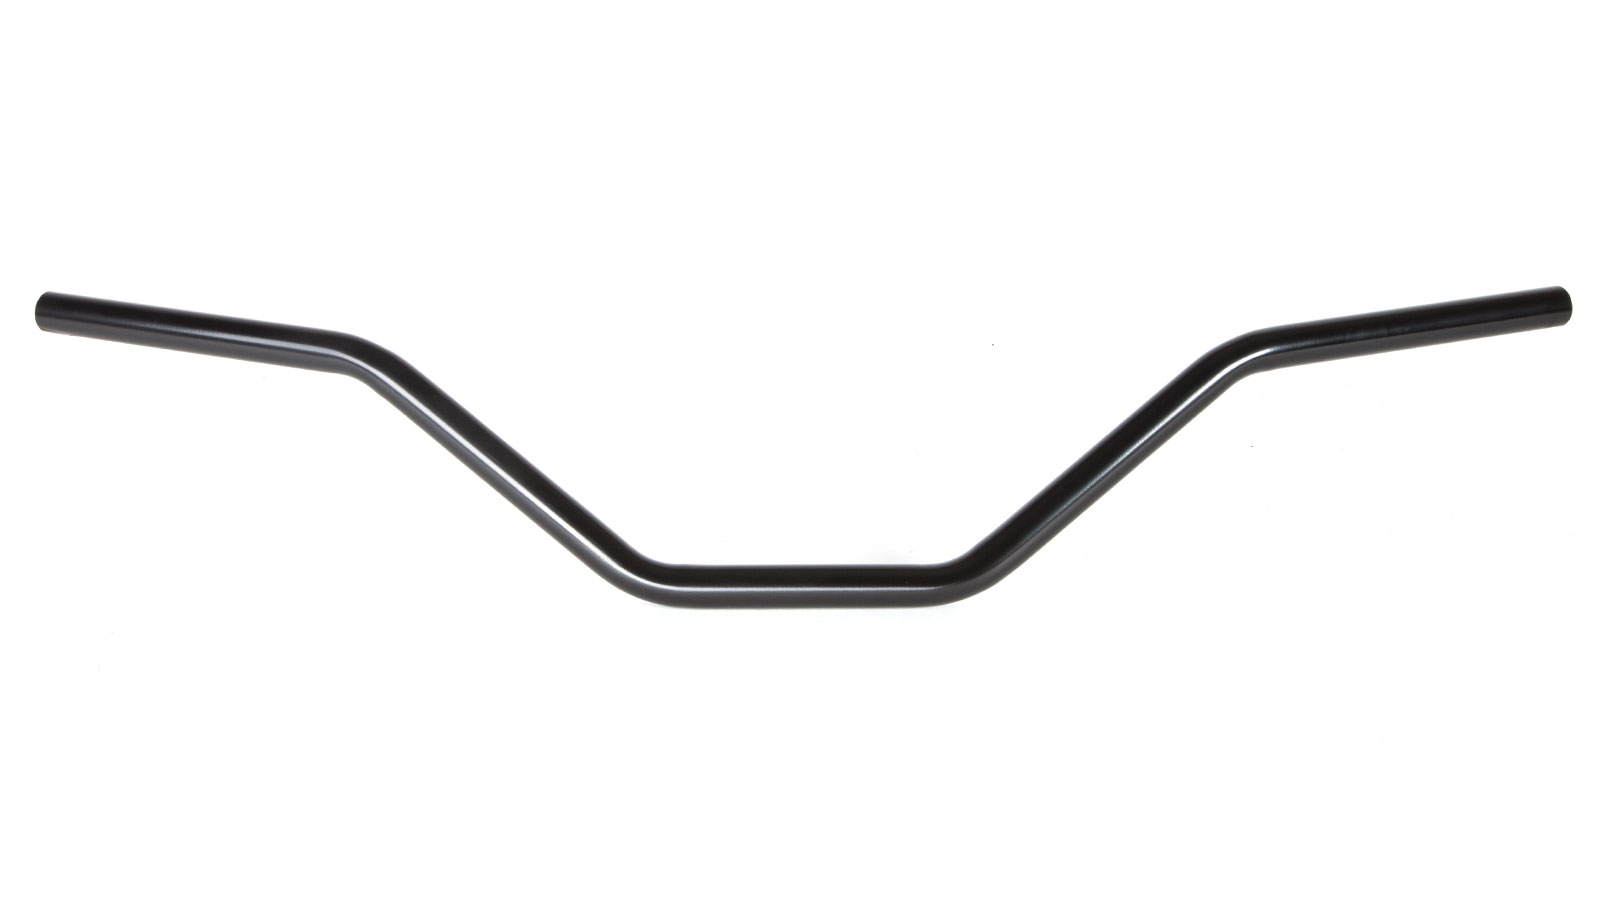 Search Results For Cruiser Bars S M Bikes